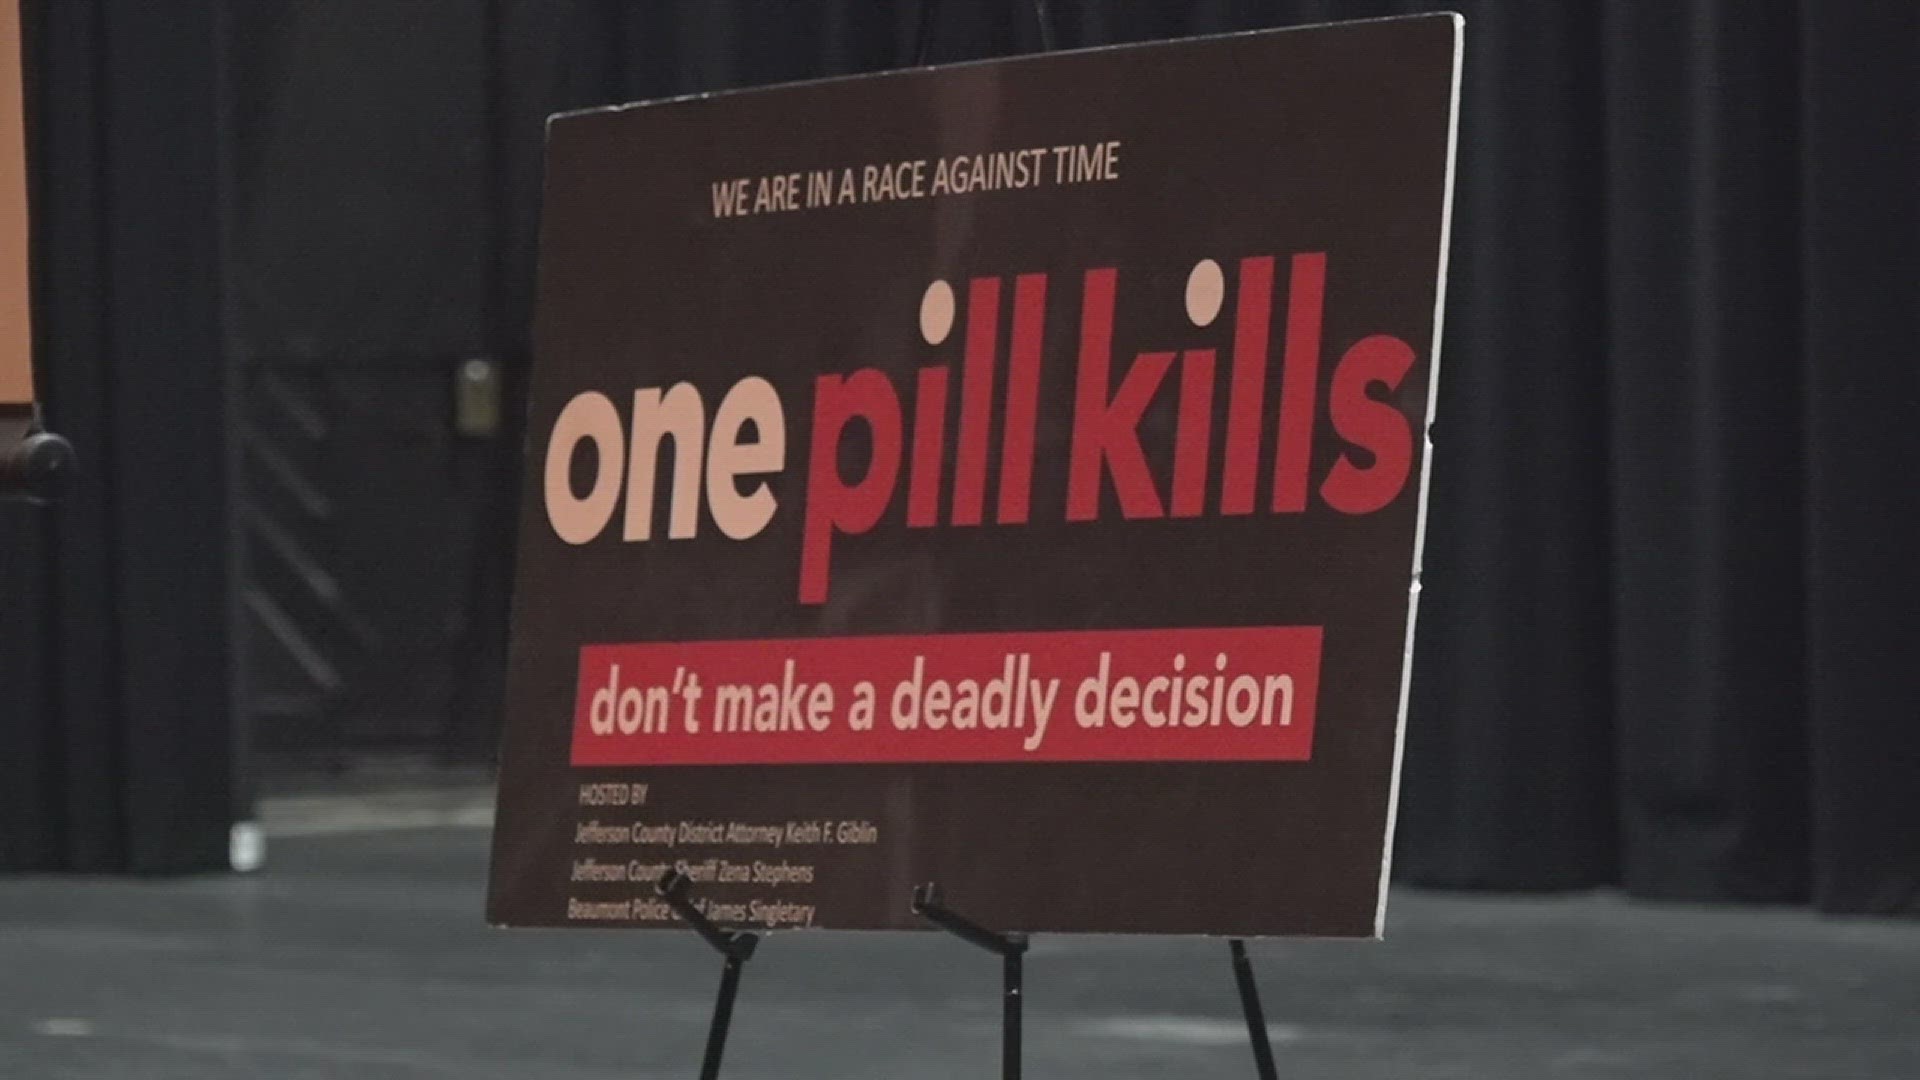 They're sharing the message that "one pill kills" with thousands of students.